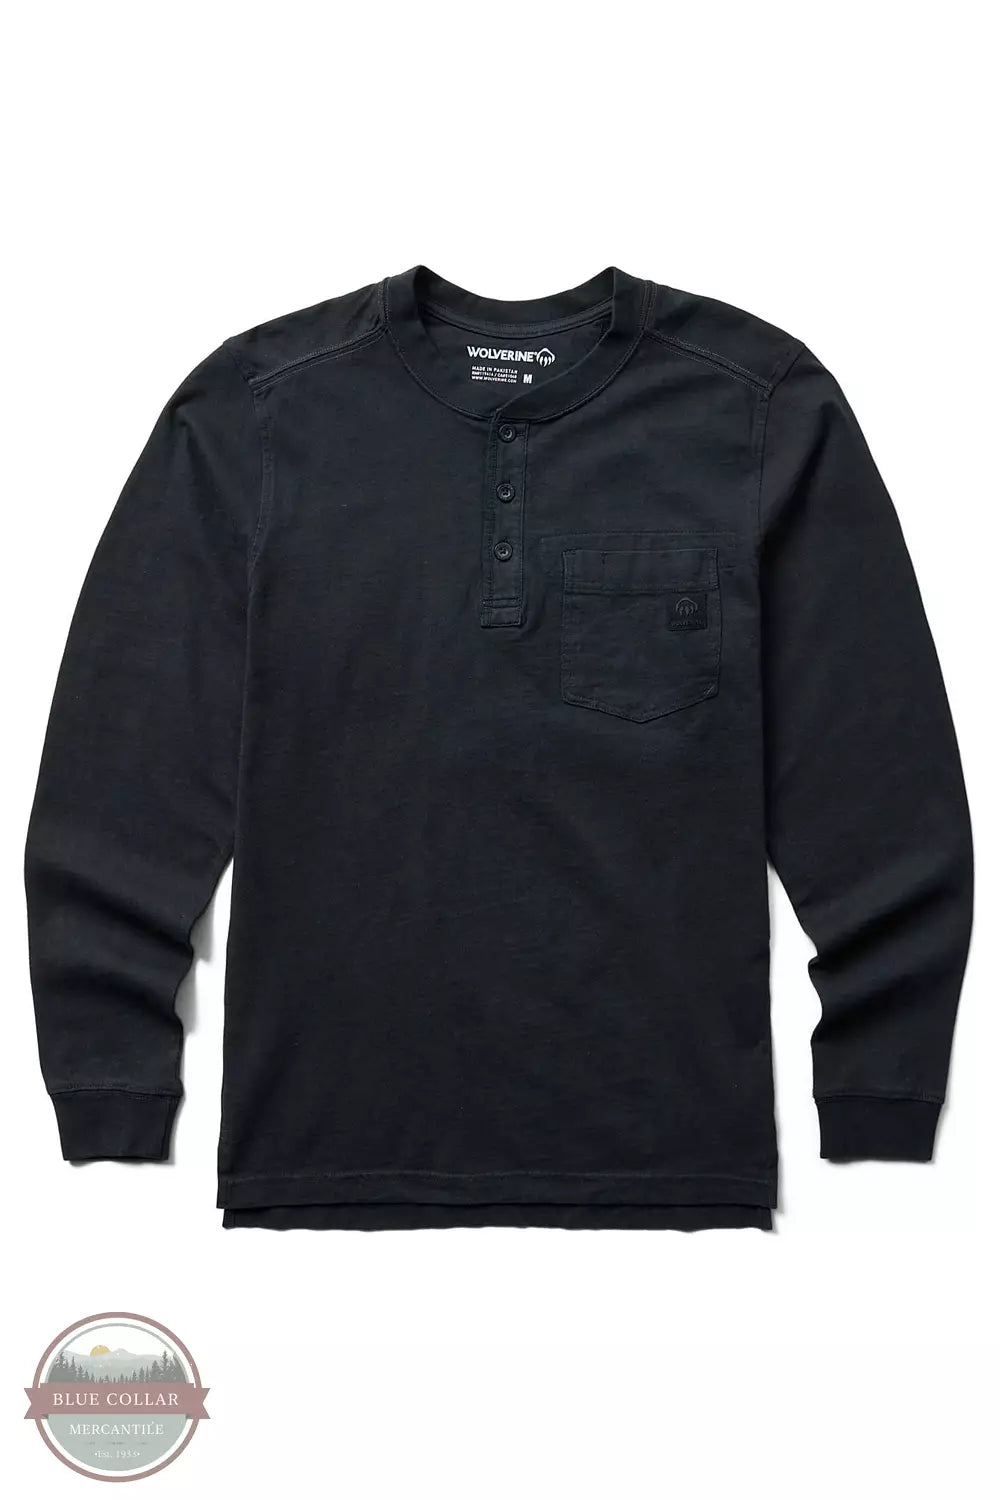 Wolverine W1209290 Guardian Cotton Long Sleeve Henley Black Front View